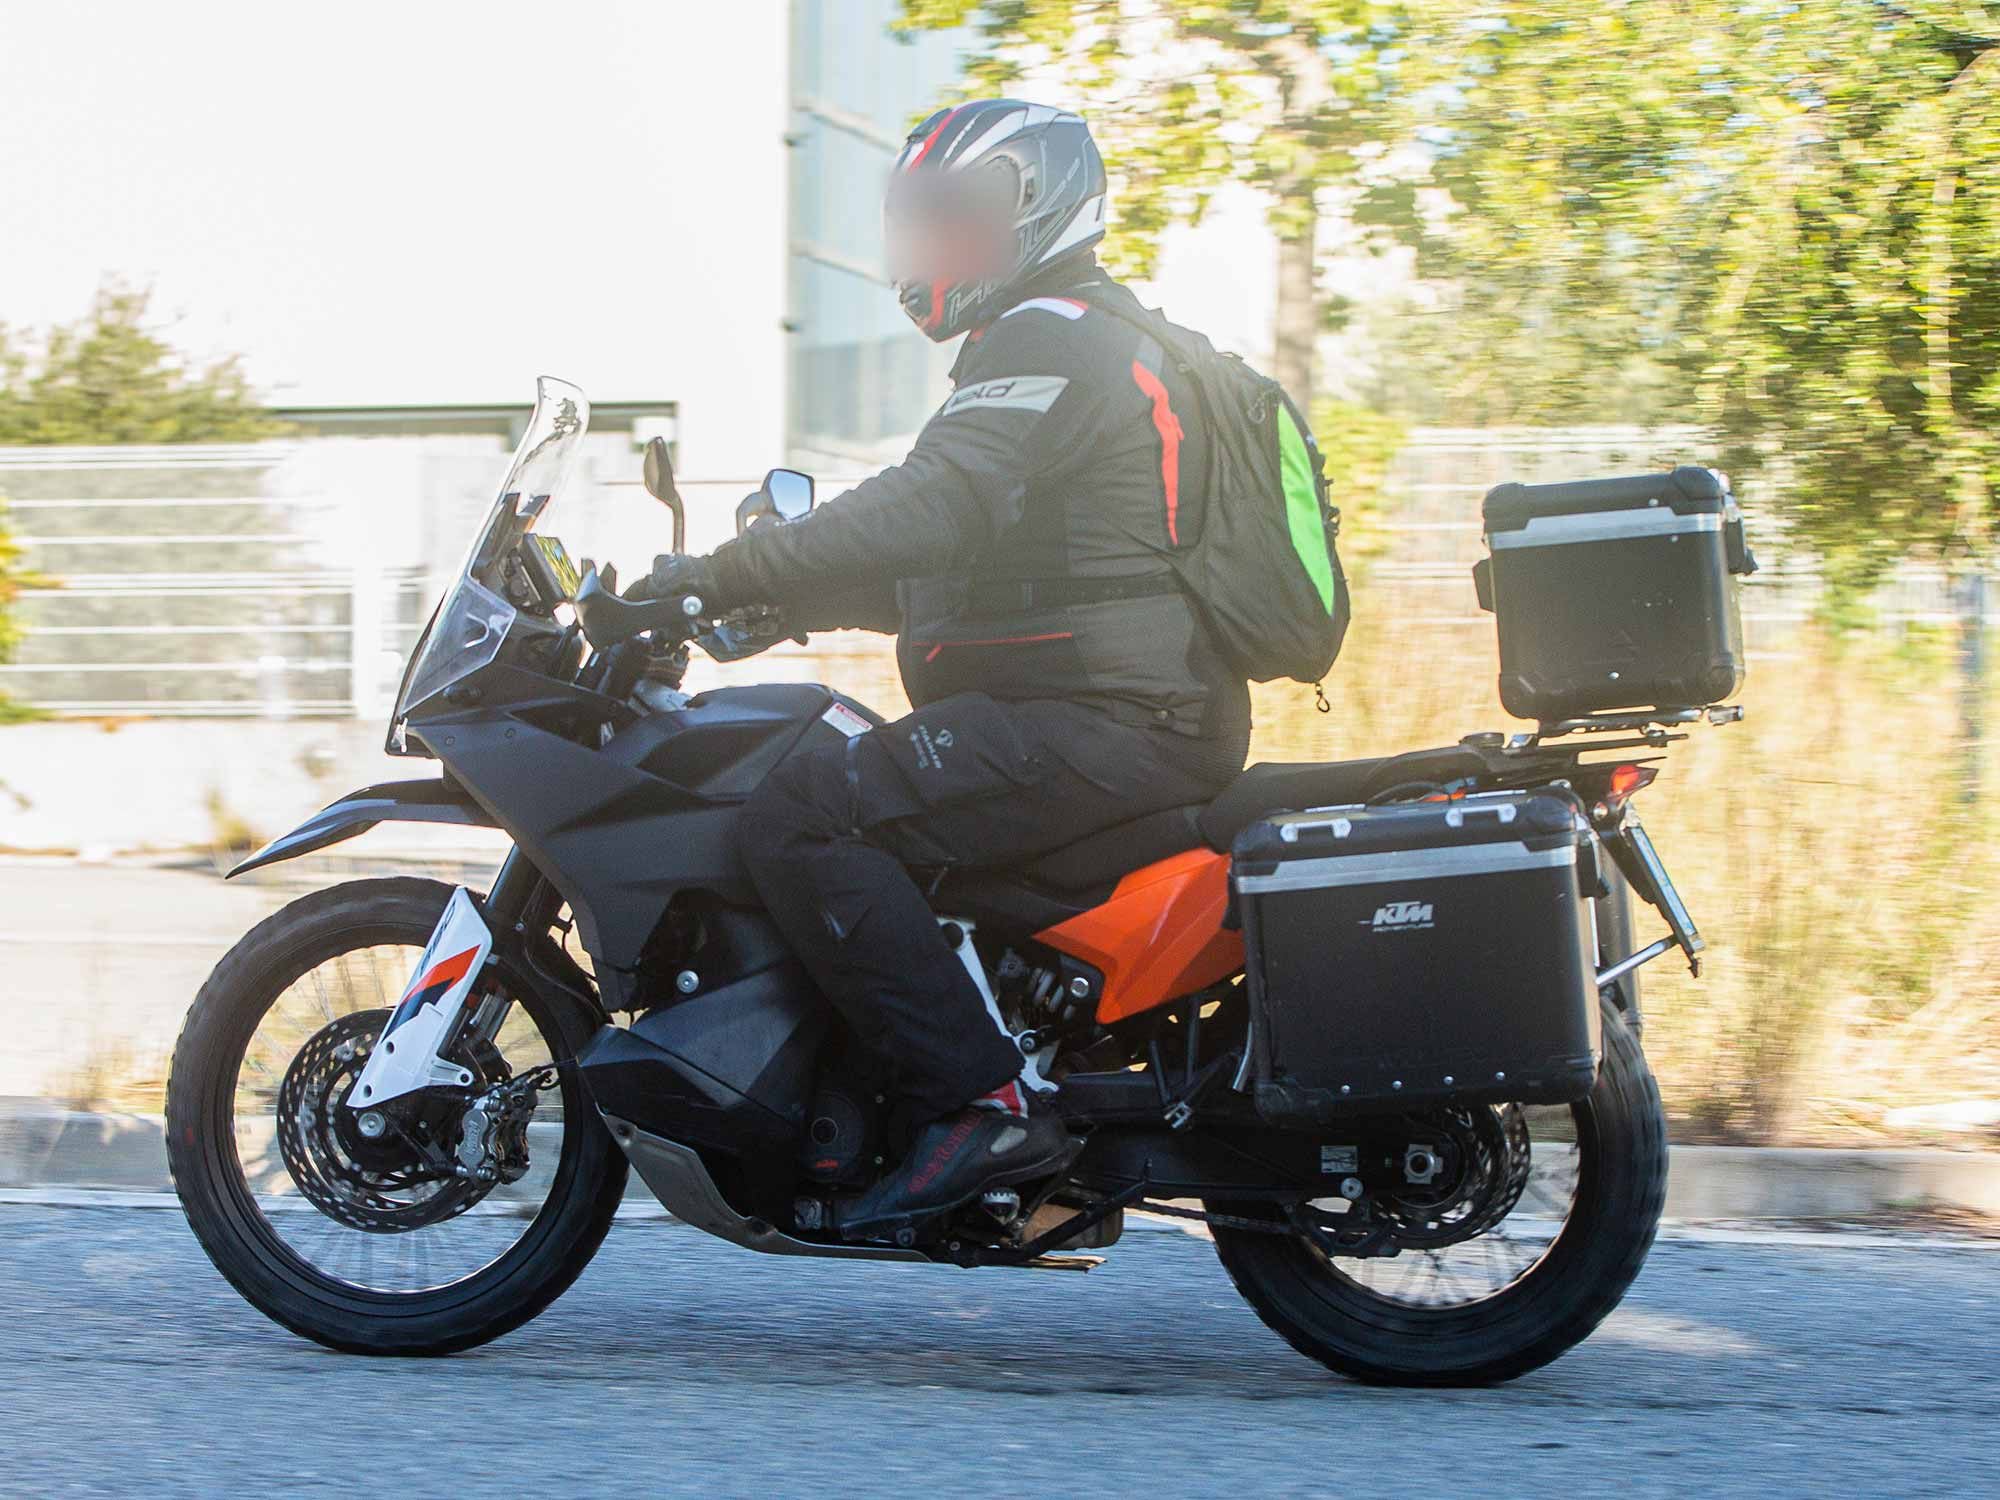 Prototypes spotted in testing suggest KTM will have three models in the range for 2023, including the 890 Adventure R.